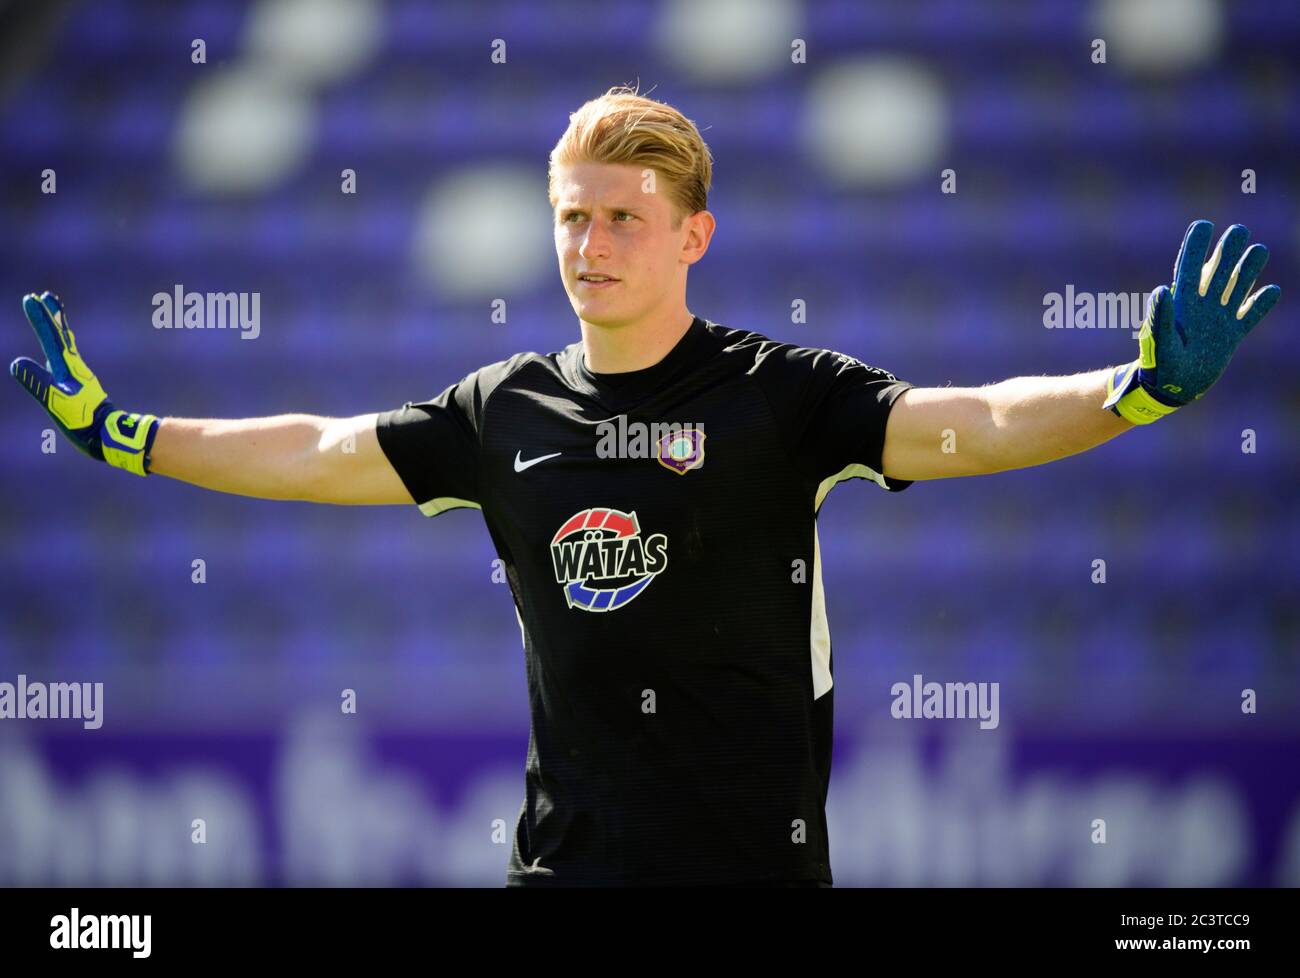 Aue, Germany. 21st June, 2020. Football: 2nd Bundesliga, FC Erzgebirge Aue - Hannover 96, 33rd matchday, at the Sparkassen-Erzgebirgsstadion. Aue's goalkeeper Robert Jendrusch gesturing. Credit: Robert Michael/dpa-Zentralbild/dpa - IMPORTANT NOTE: In accordance with the regulations of the DFL Deutsche Fußball Liga and the DFB Deutscher Fußball-Bund, it is prohibited to exploit or have exploited in the stadium and/or from the game taken photographs in the form of sequence images and/or video-like photo series./dpa/Alamy Live News Stock Photo